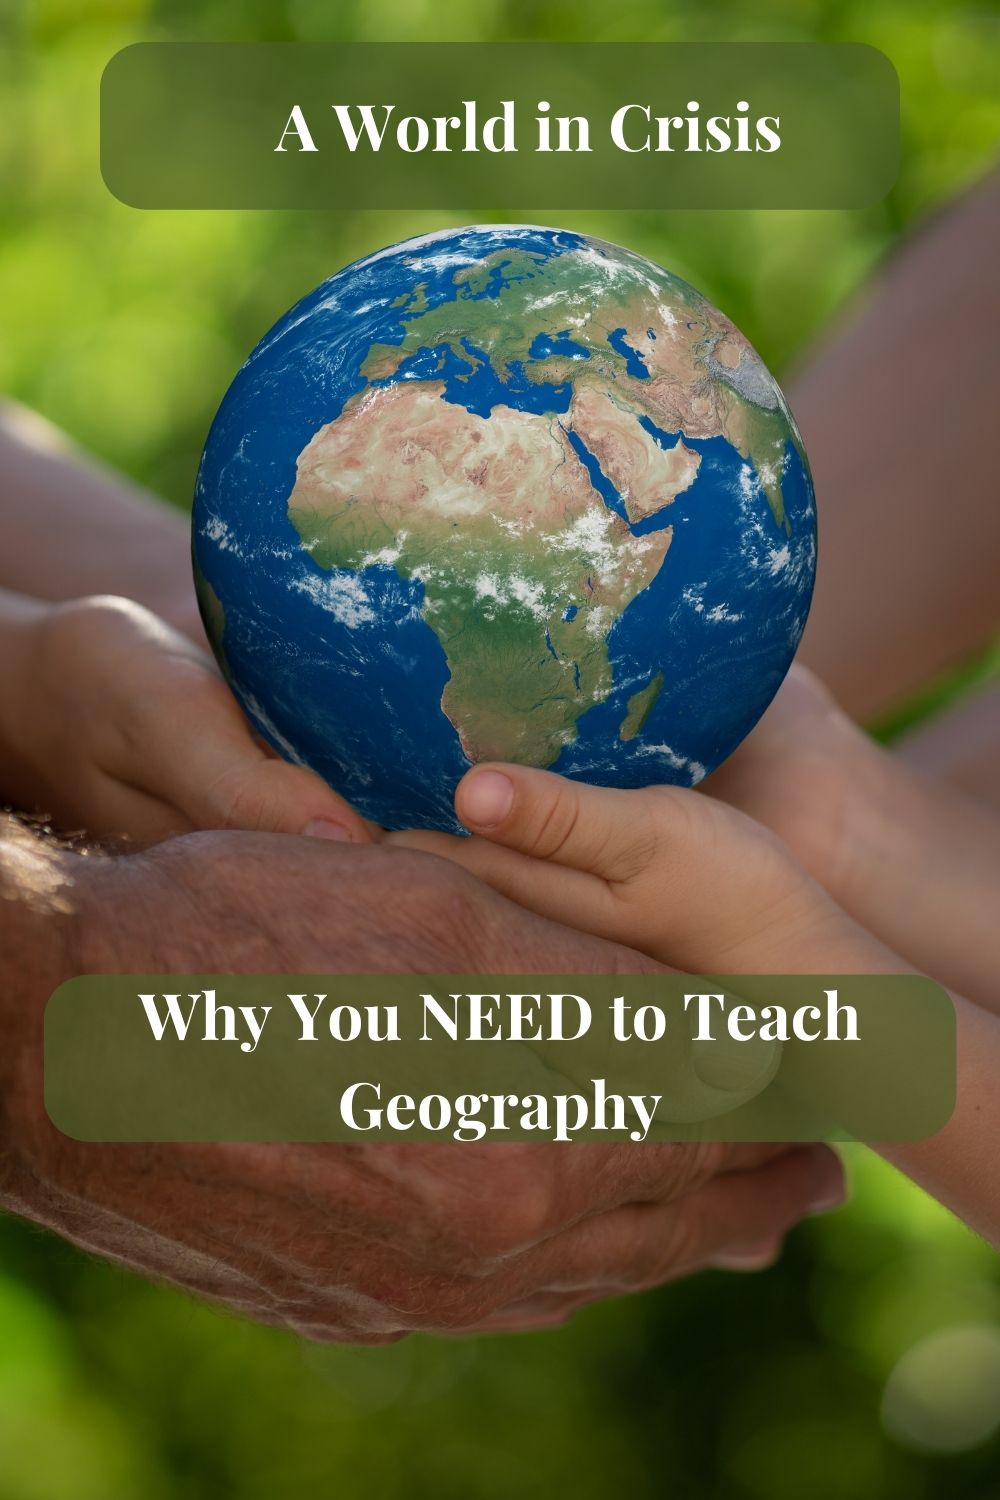 Our kids NEED to learn about the world and people around them. Teach geography to open the minds and hearts of your kids!